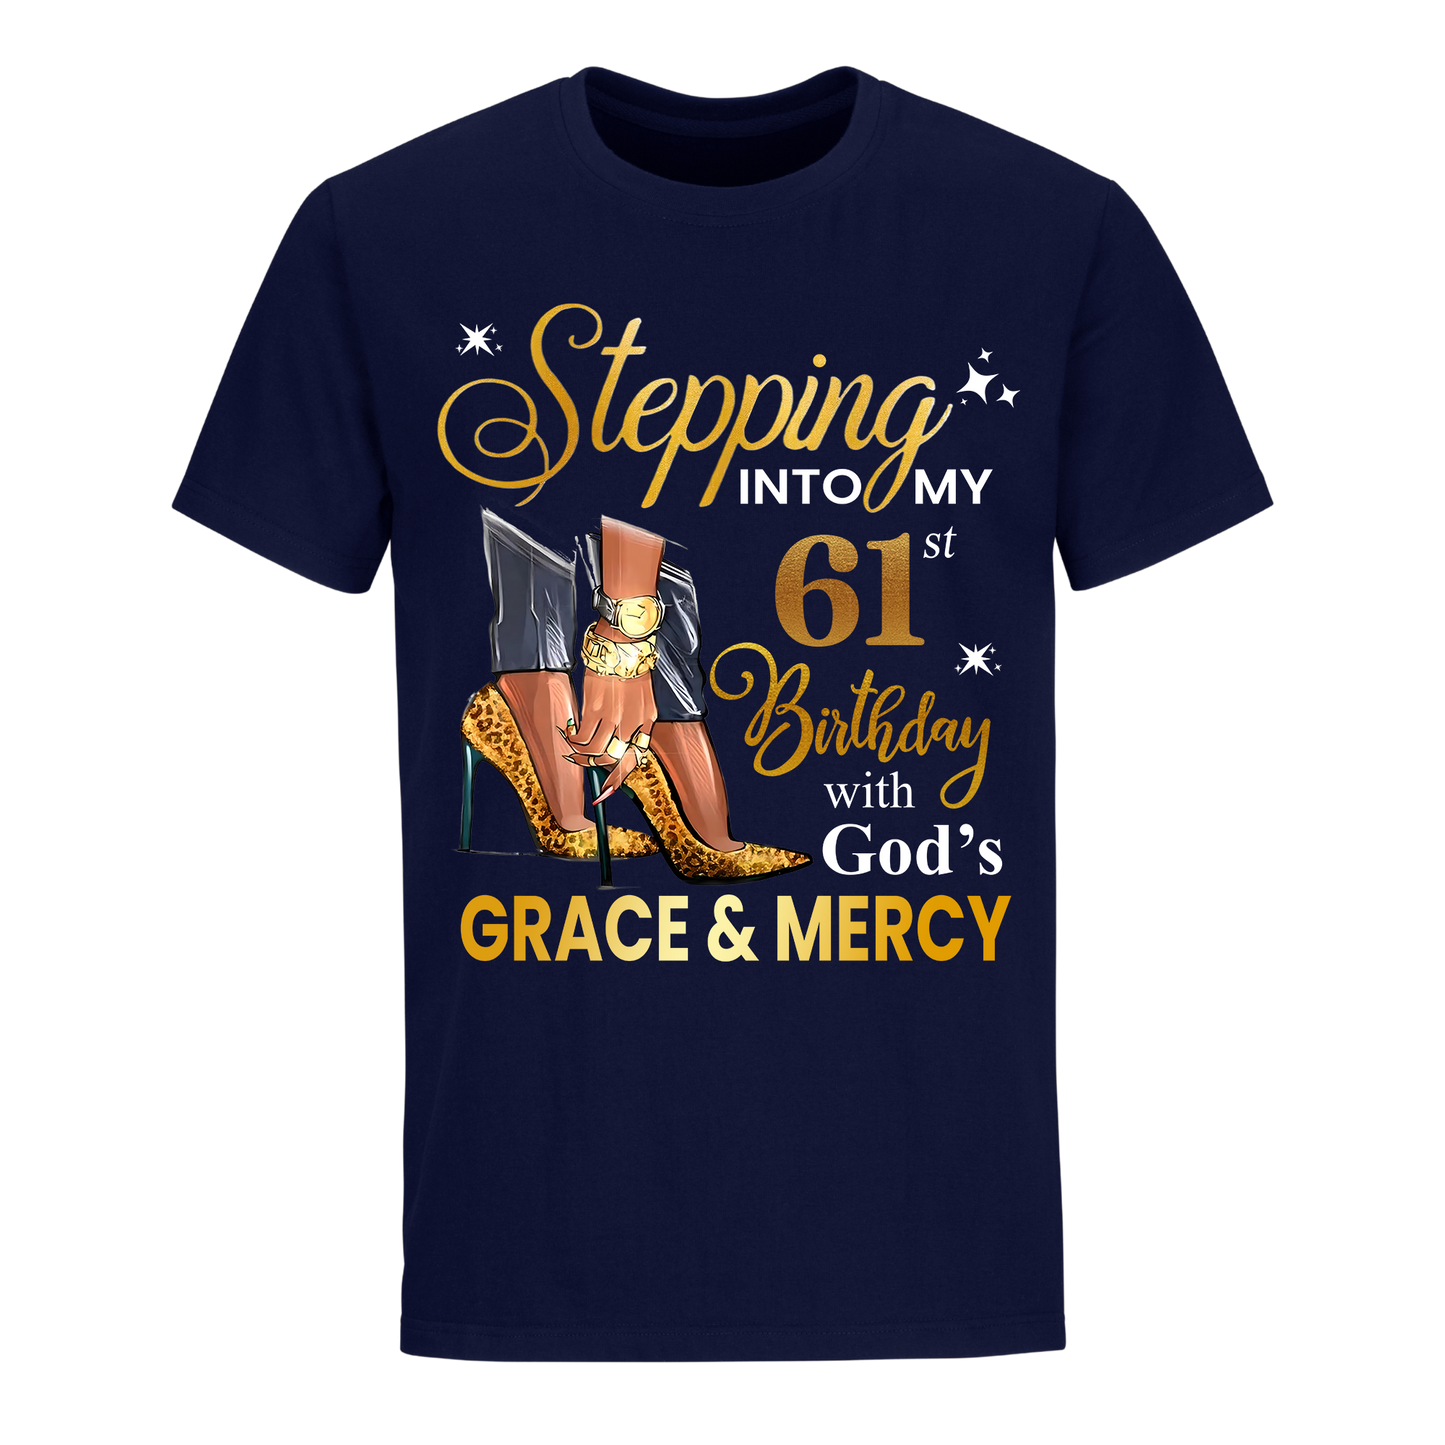 STEPPING INTO MY GRACE AND MERCY 61ST BIRTHDAY UNISEX SHIRT